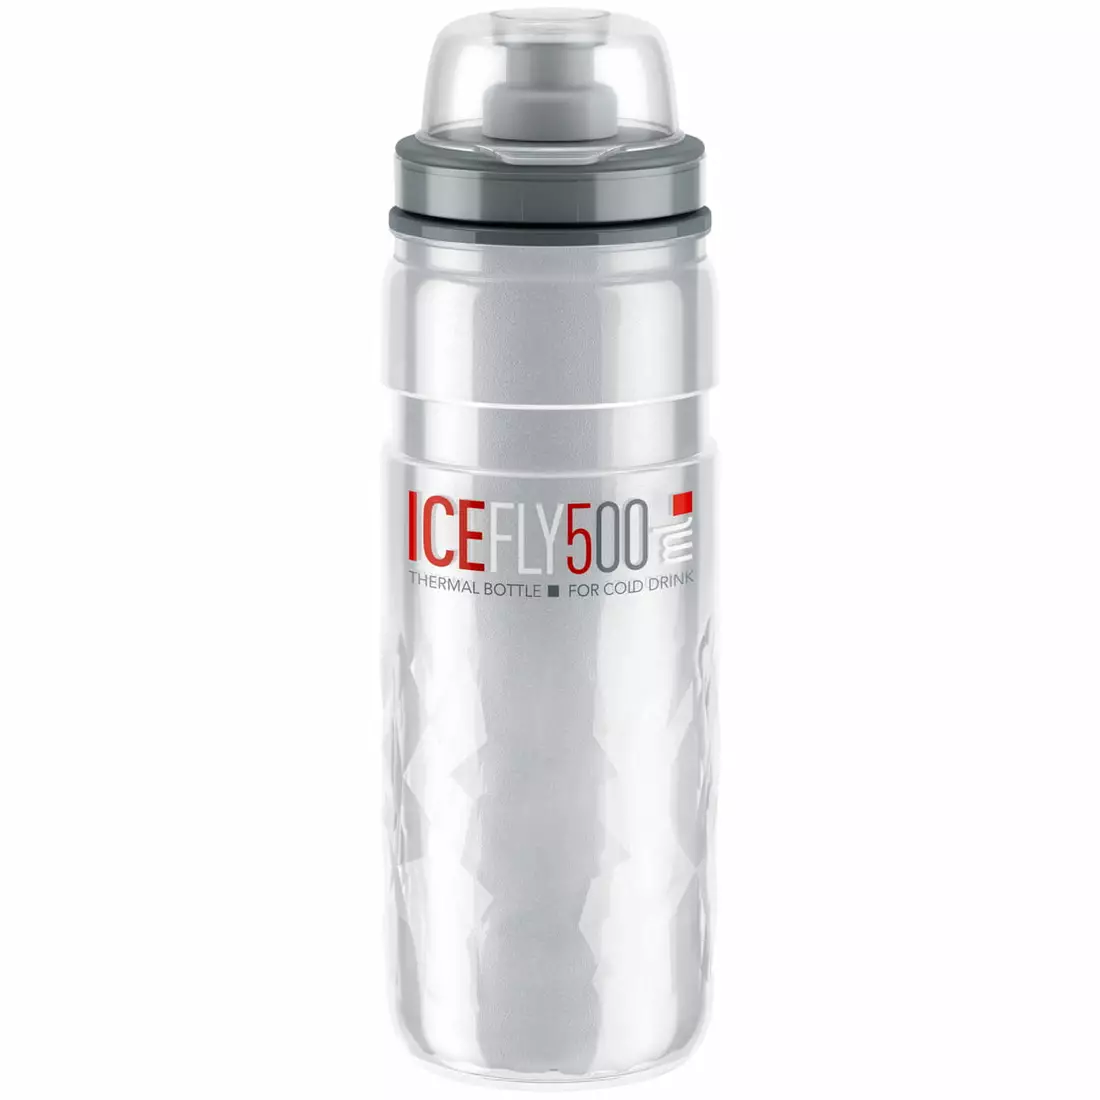 ELITE ICE FLY Fahrrad-Thermoflasche 500 ml, clear